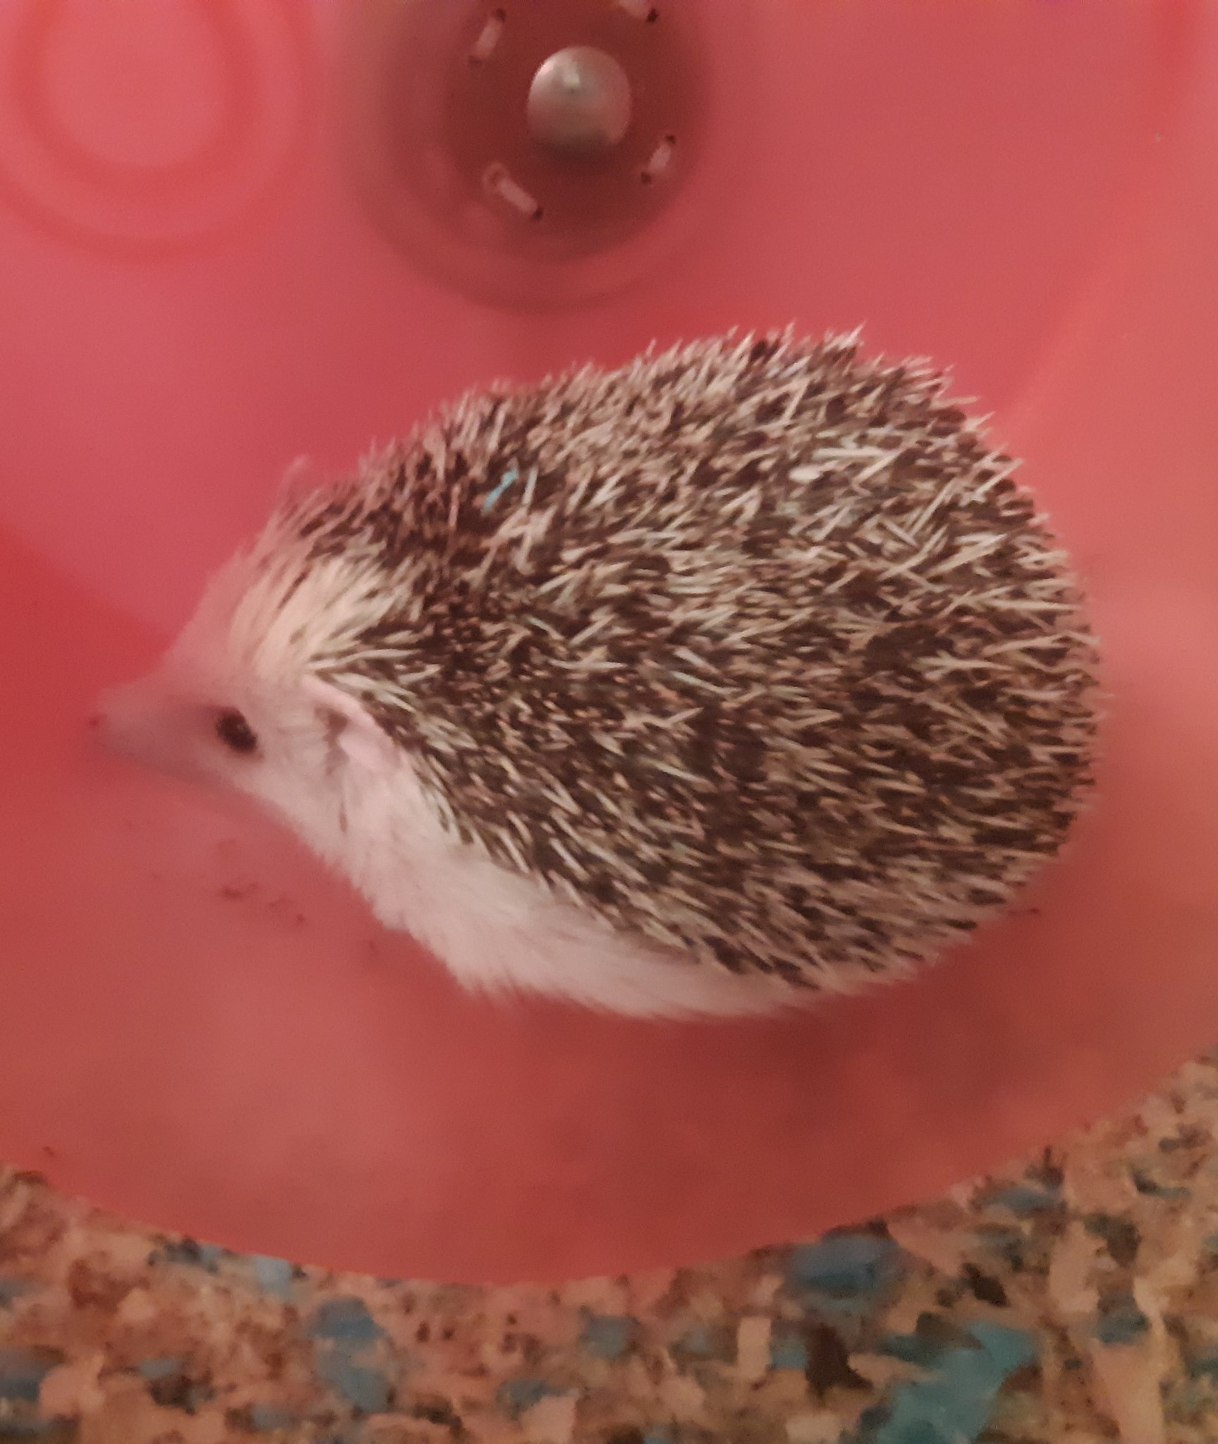 Flower in her wheel ready to poop on it after I just finished cleaning it :) - meme